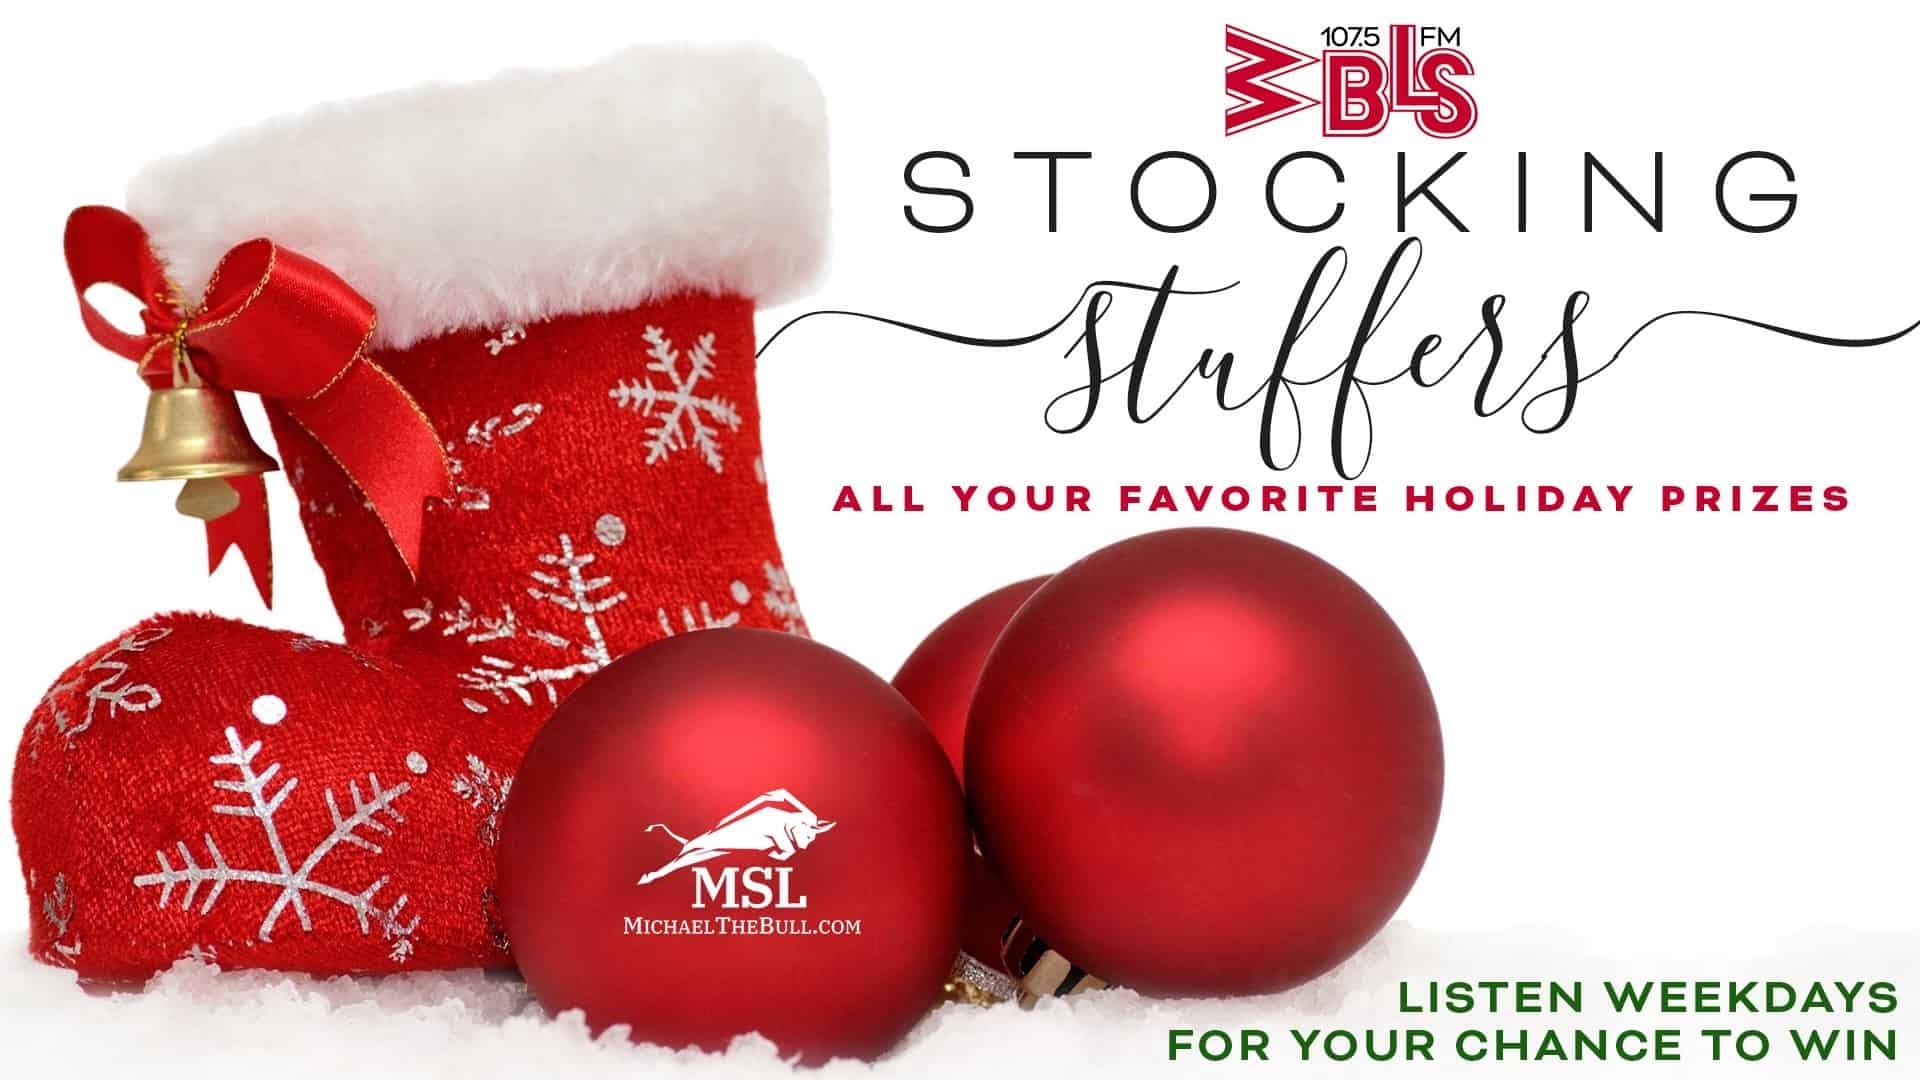 Get In The Holiday Spirit w/ WBLS Stocking Stuffers!